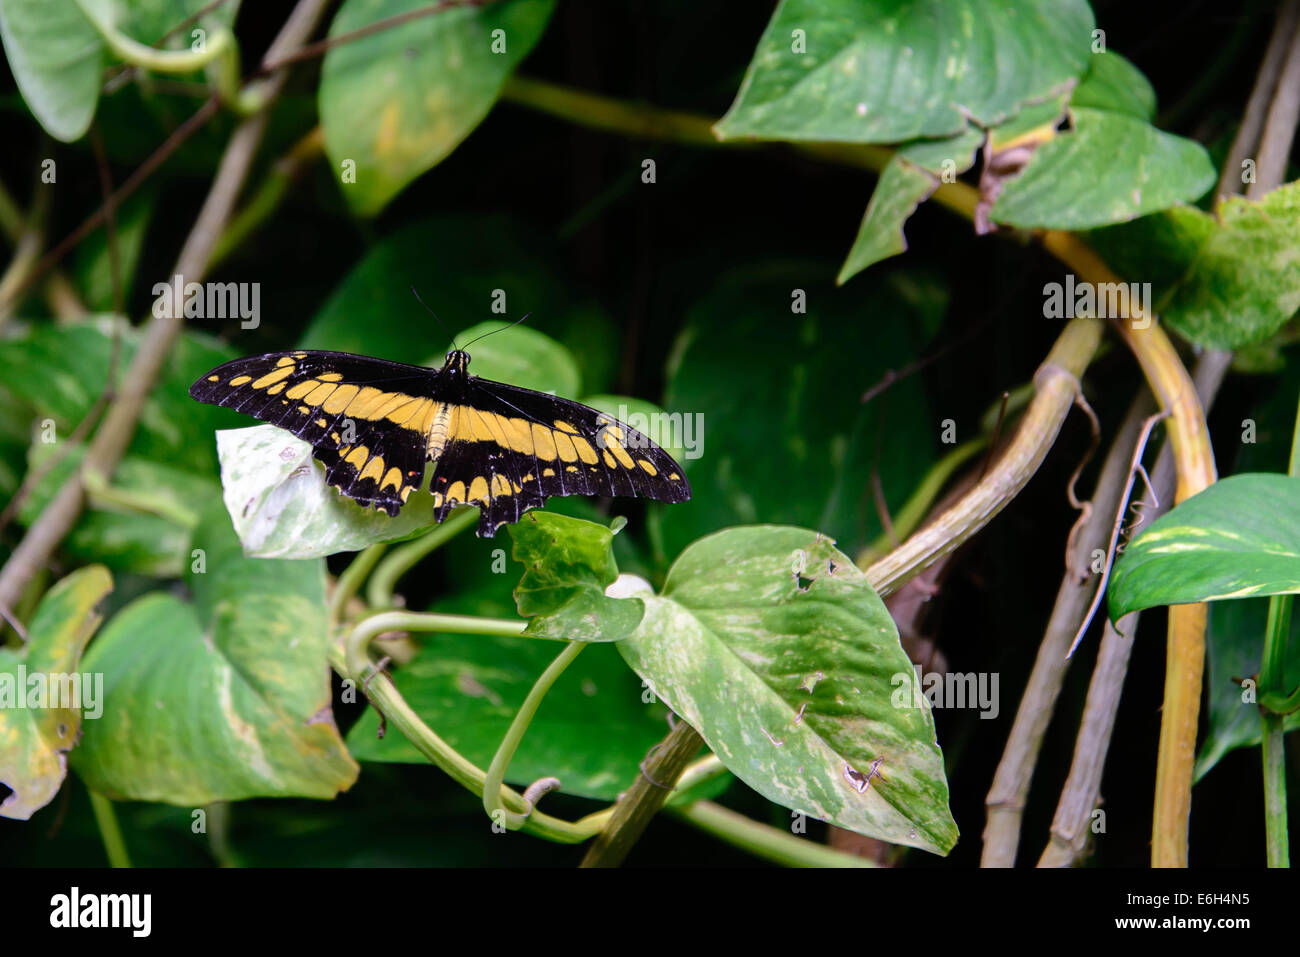 black and yellow Giant Swallowtail butterfly in nature Stock Photo